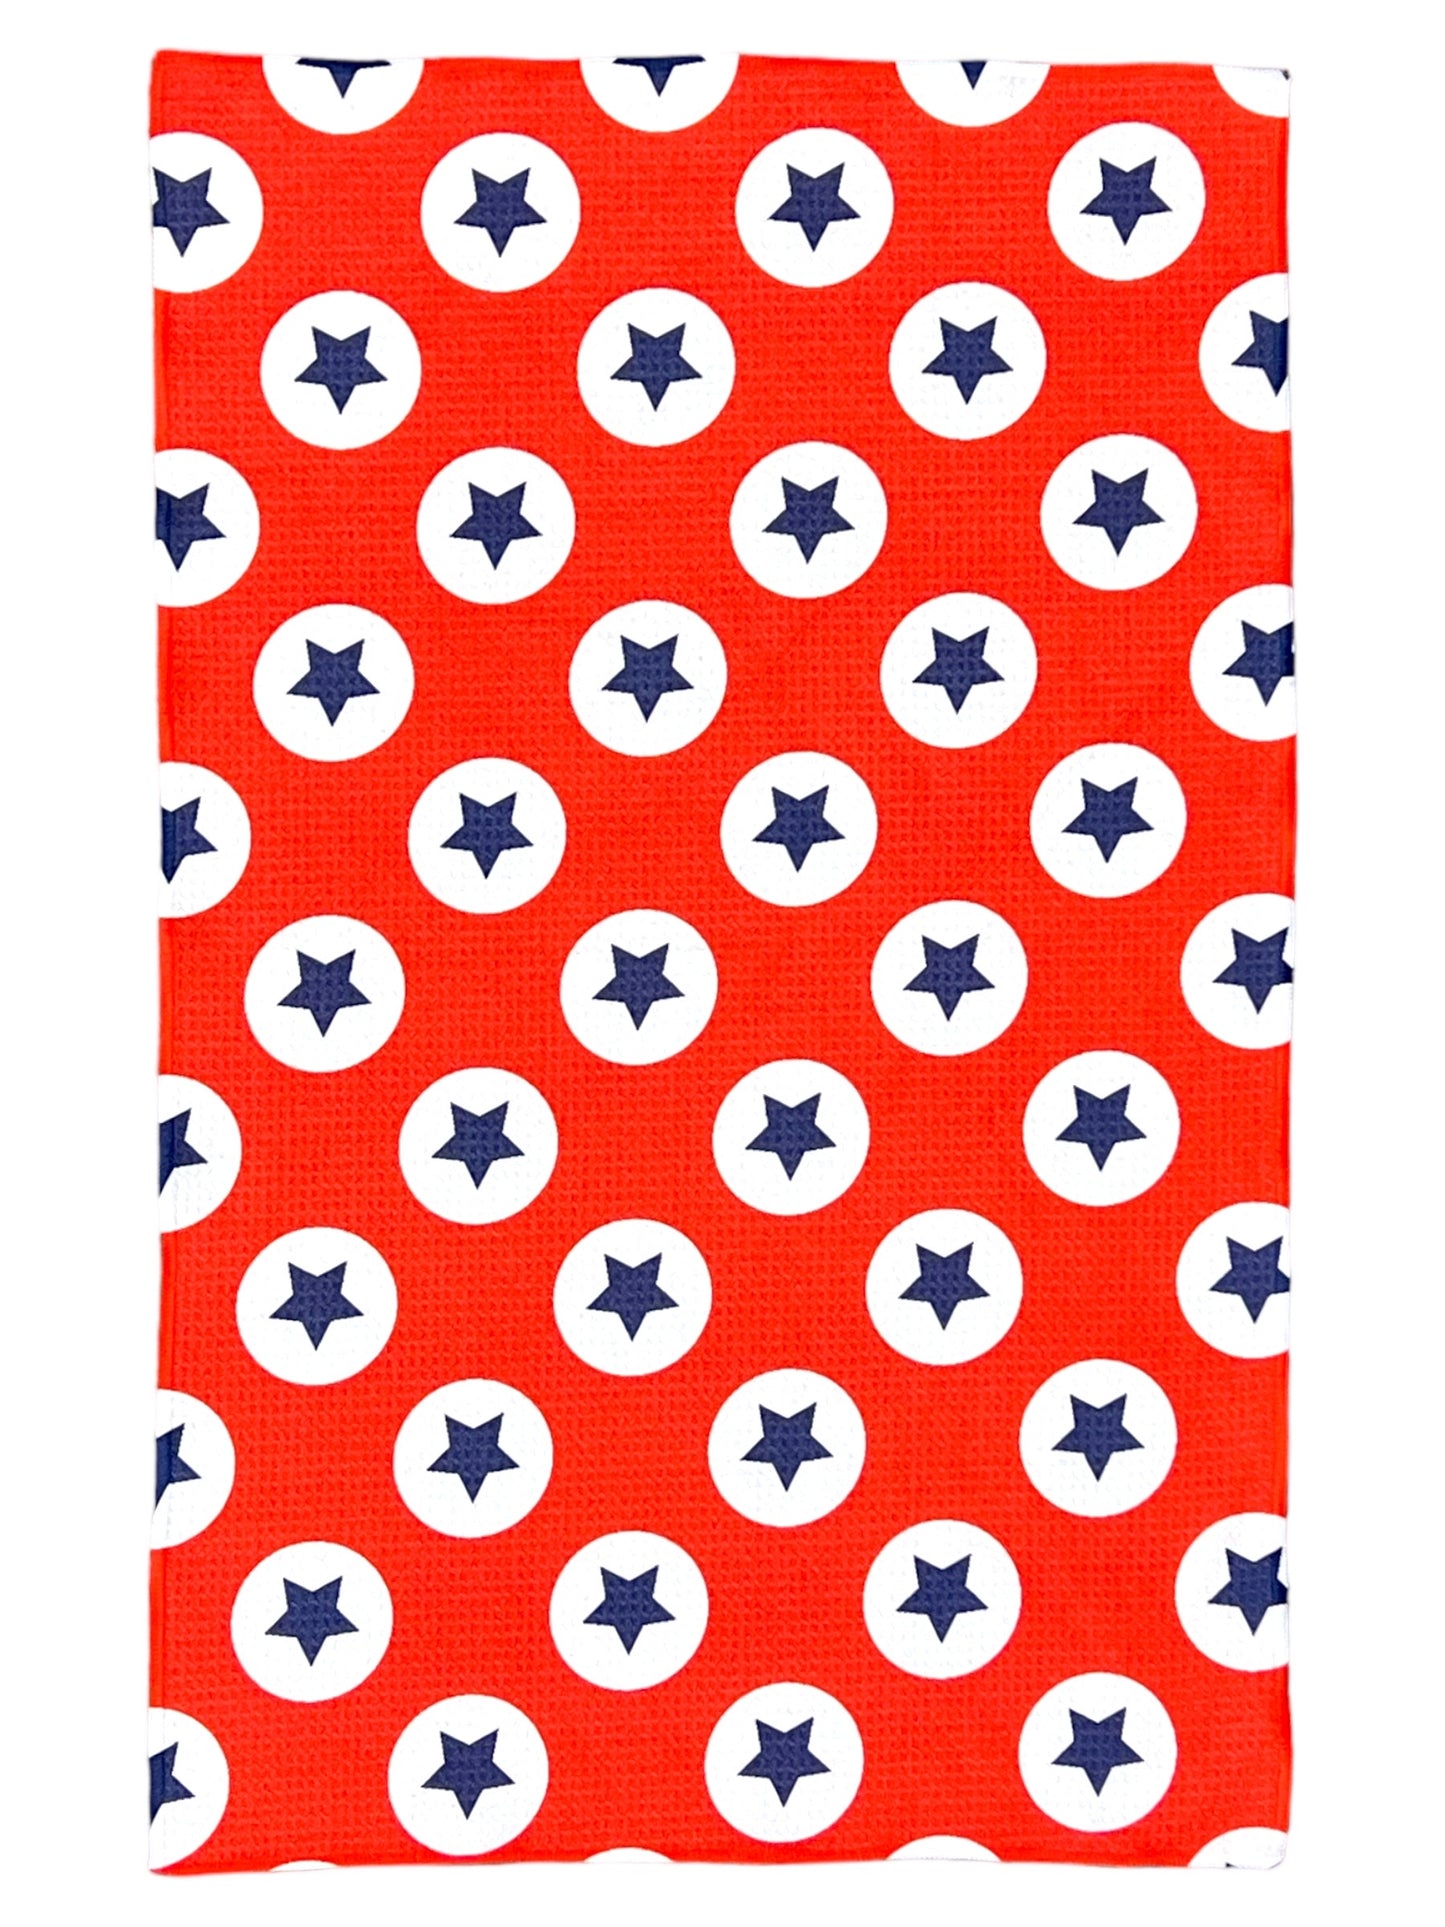 Decked out in the Red, White and Blue: Single-Sided Hand Towel